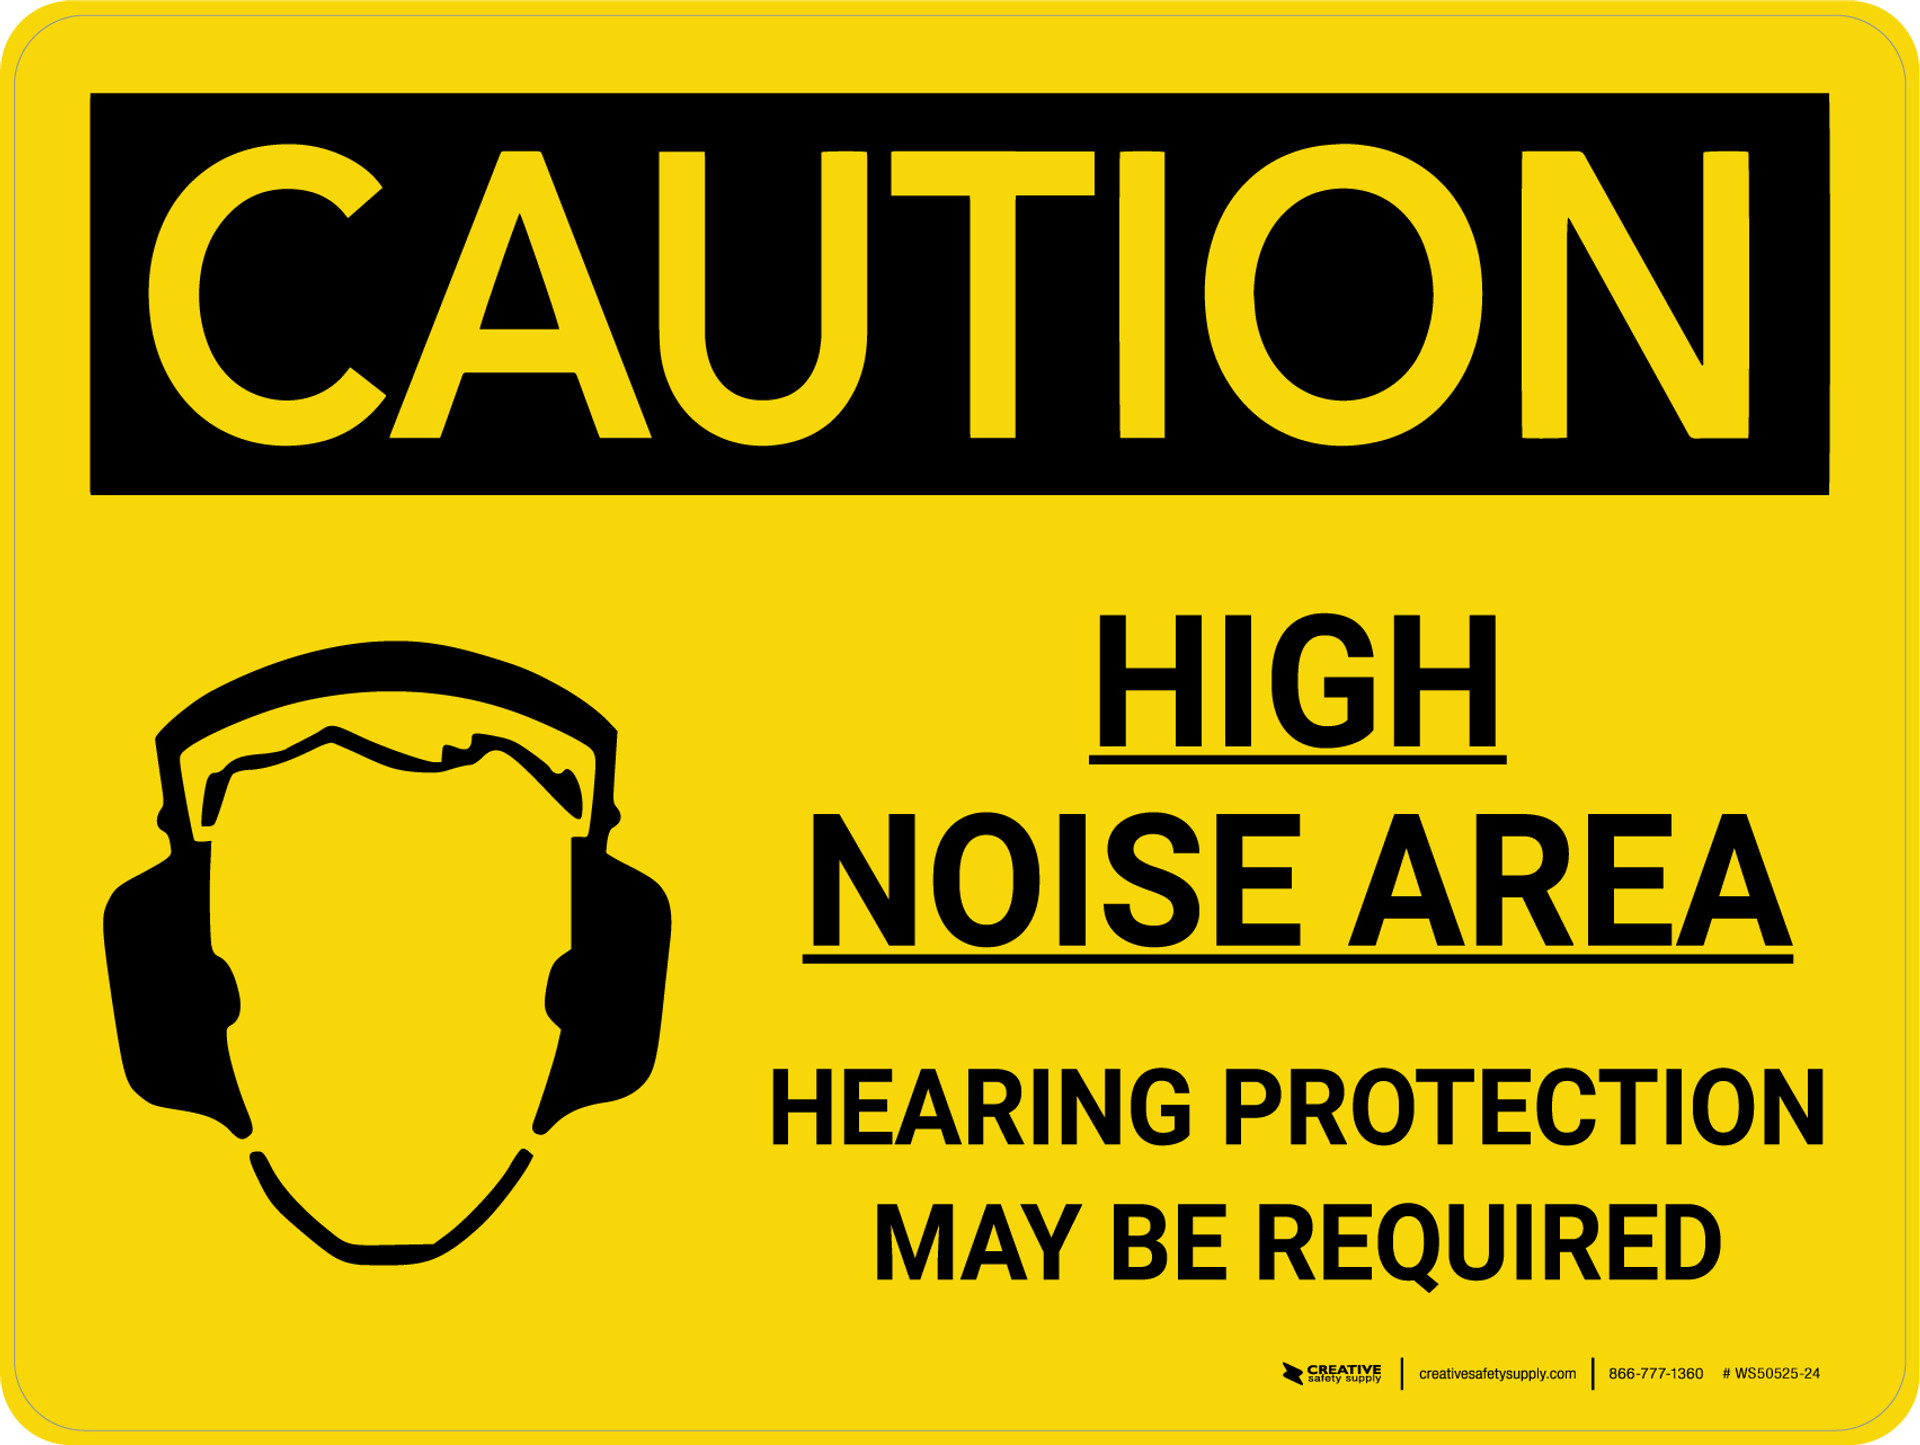 caution-ppe-high-noise-area-hearing-protection-may-be-required